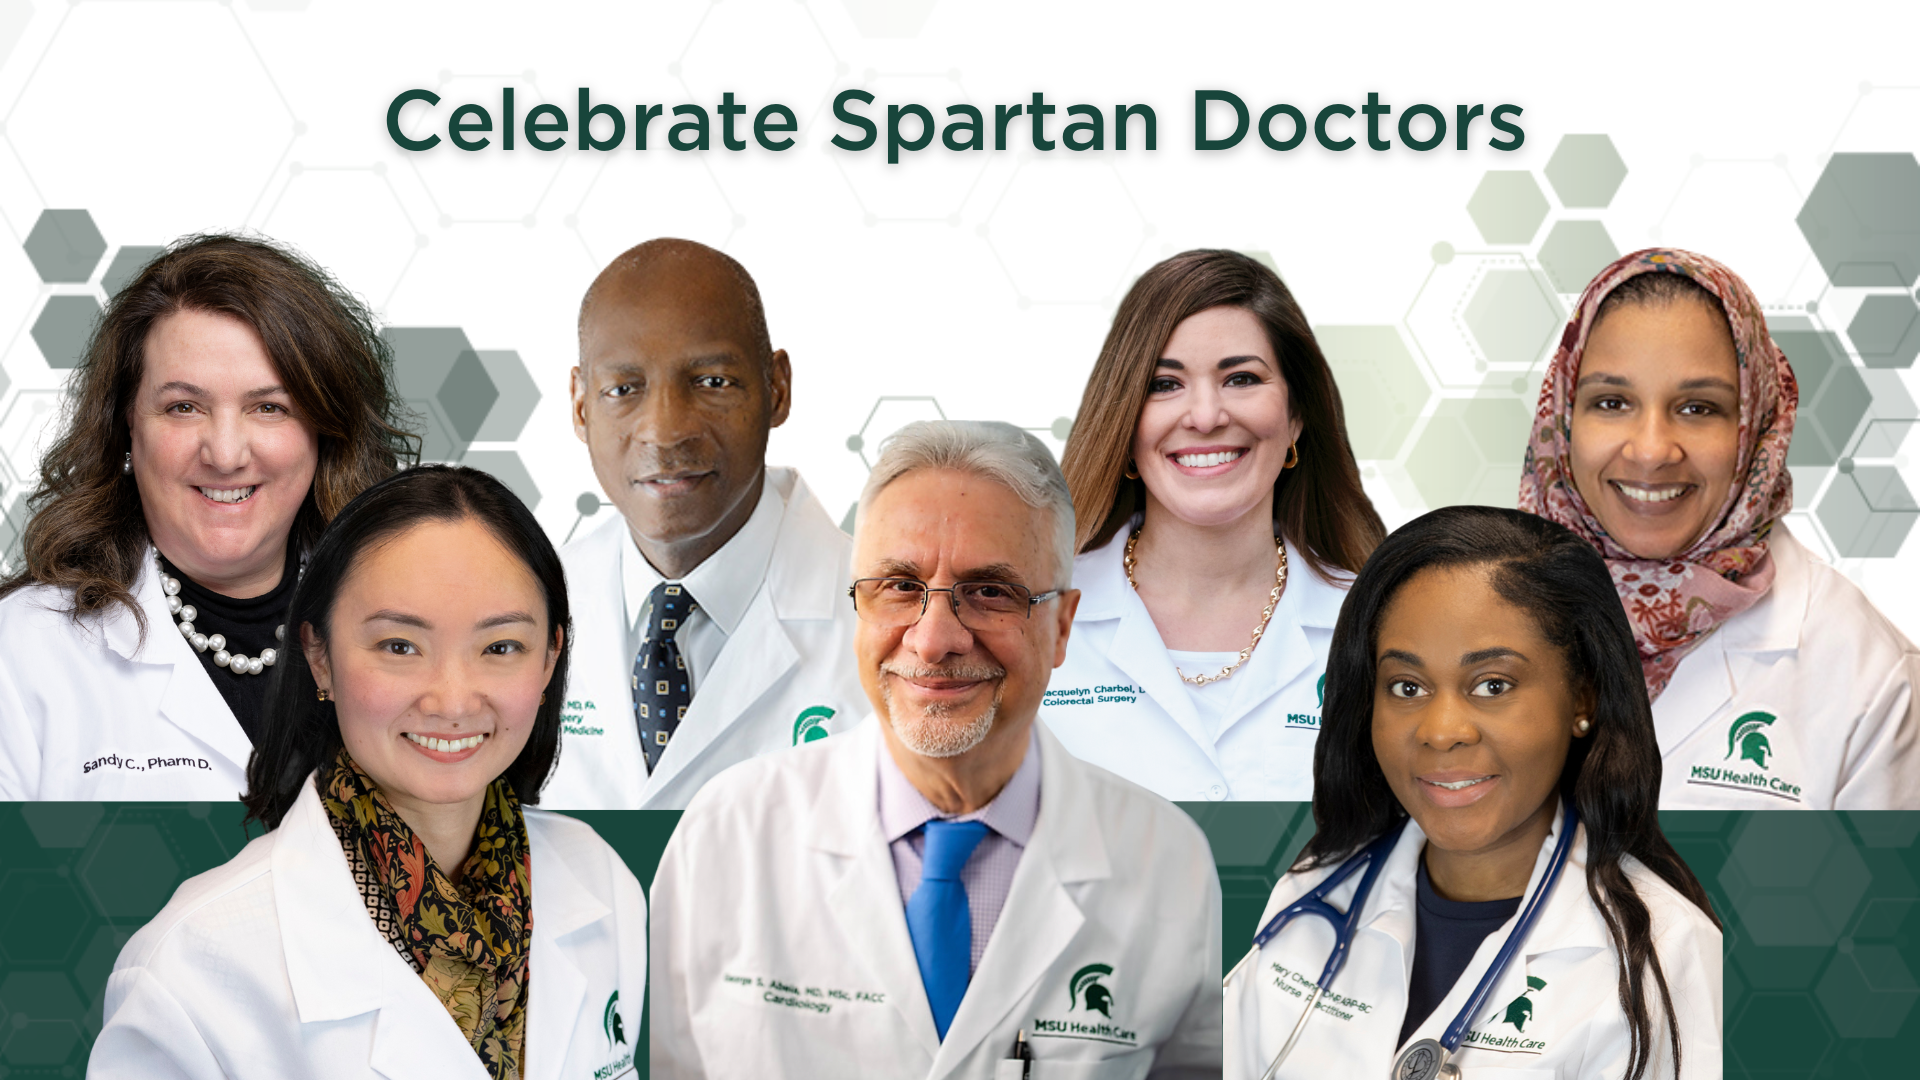 MSU Health Care Recognizes Award-Winning Doctors  in Honor of Doctors' Day